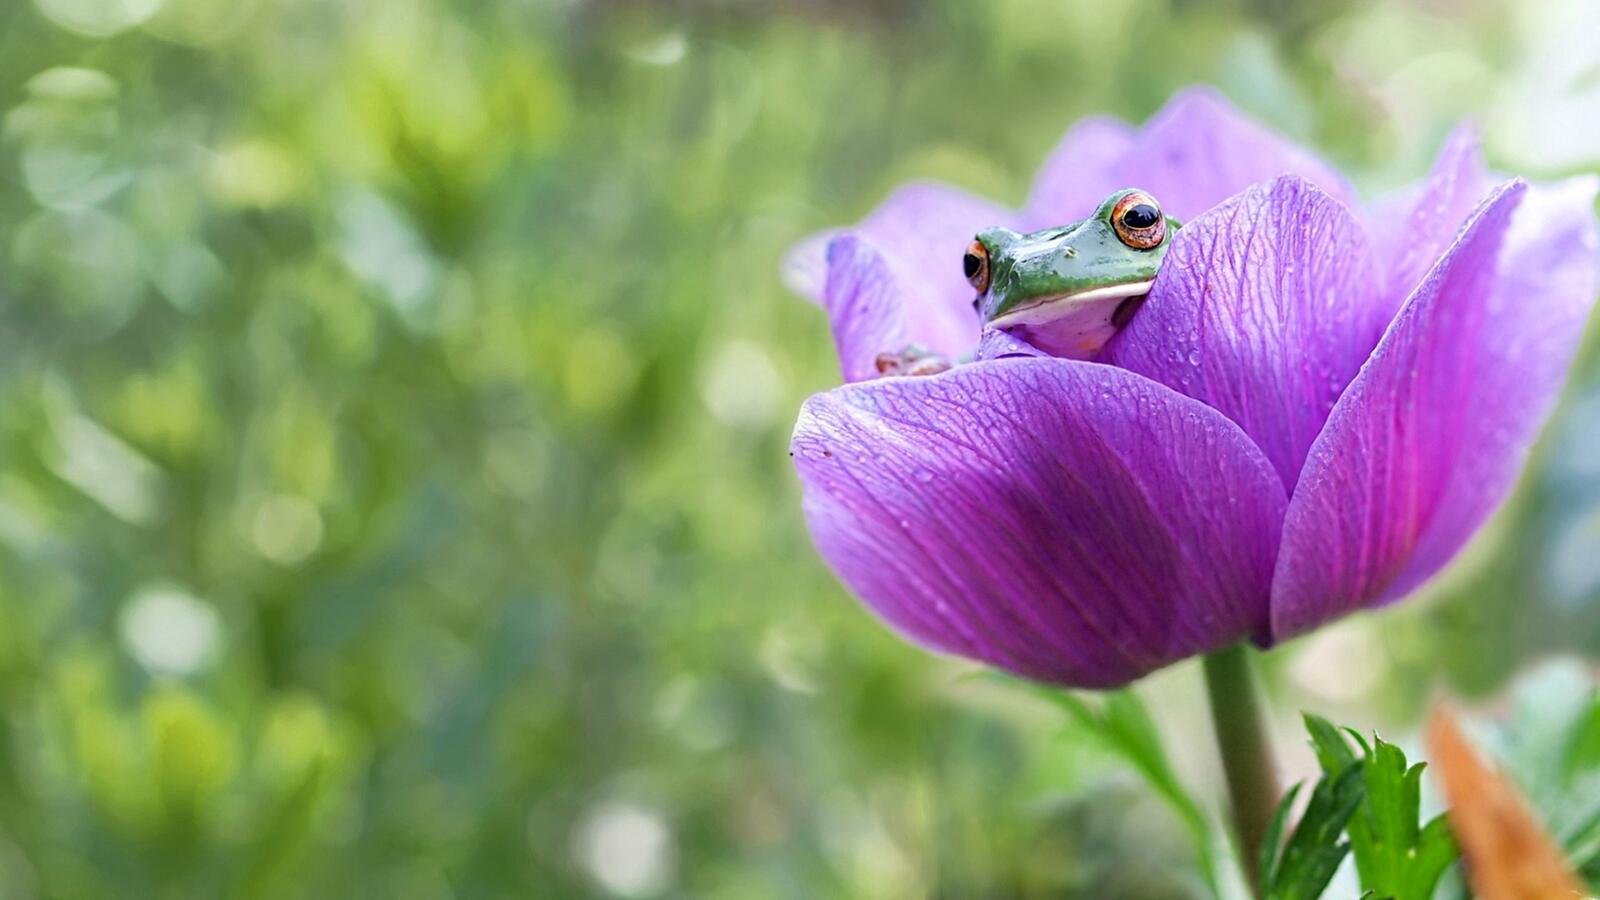 Free photo A green frog sits in a purple flower